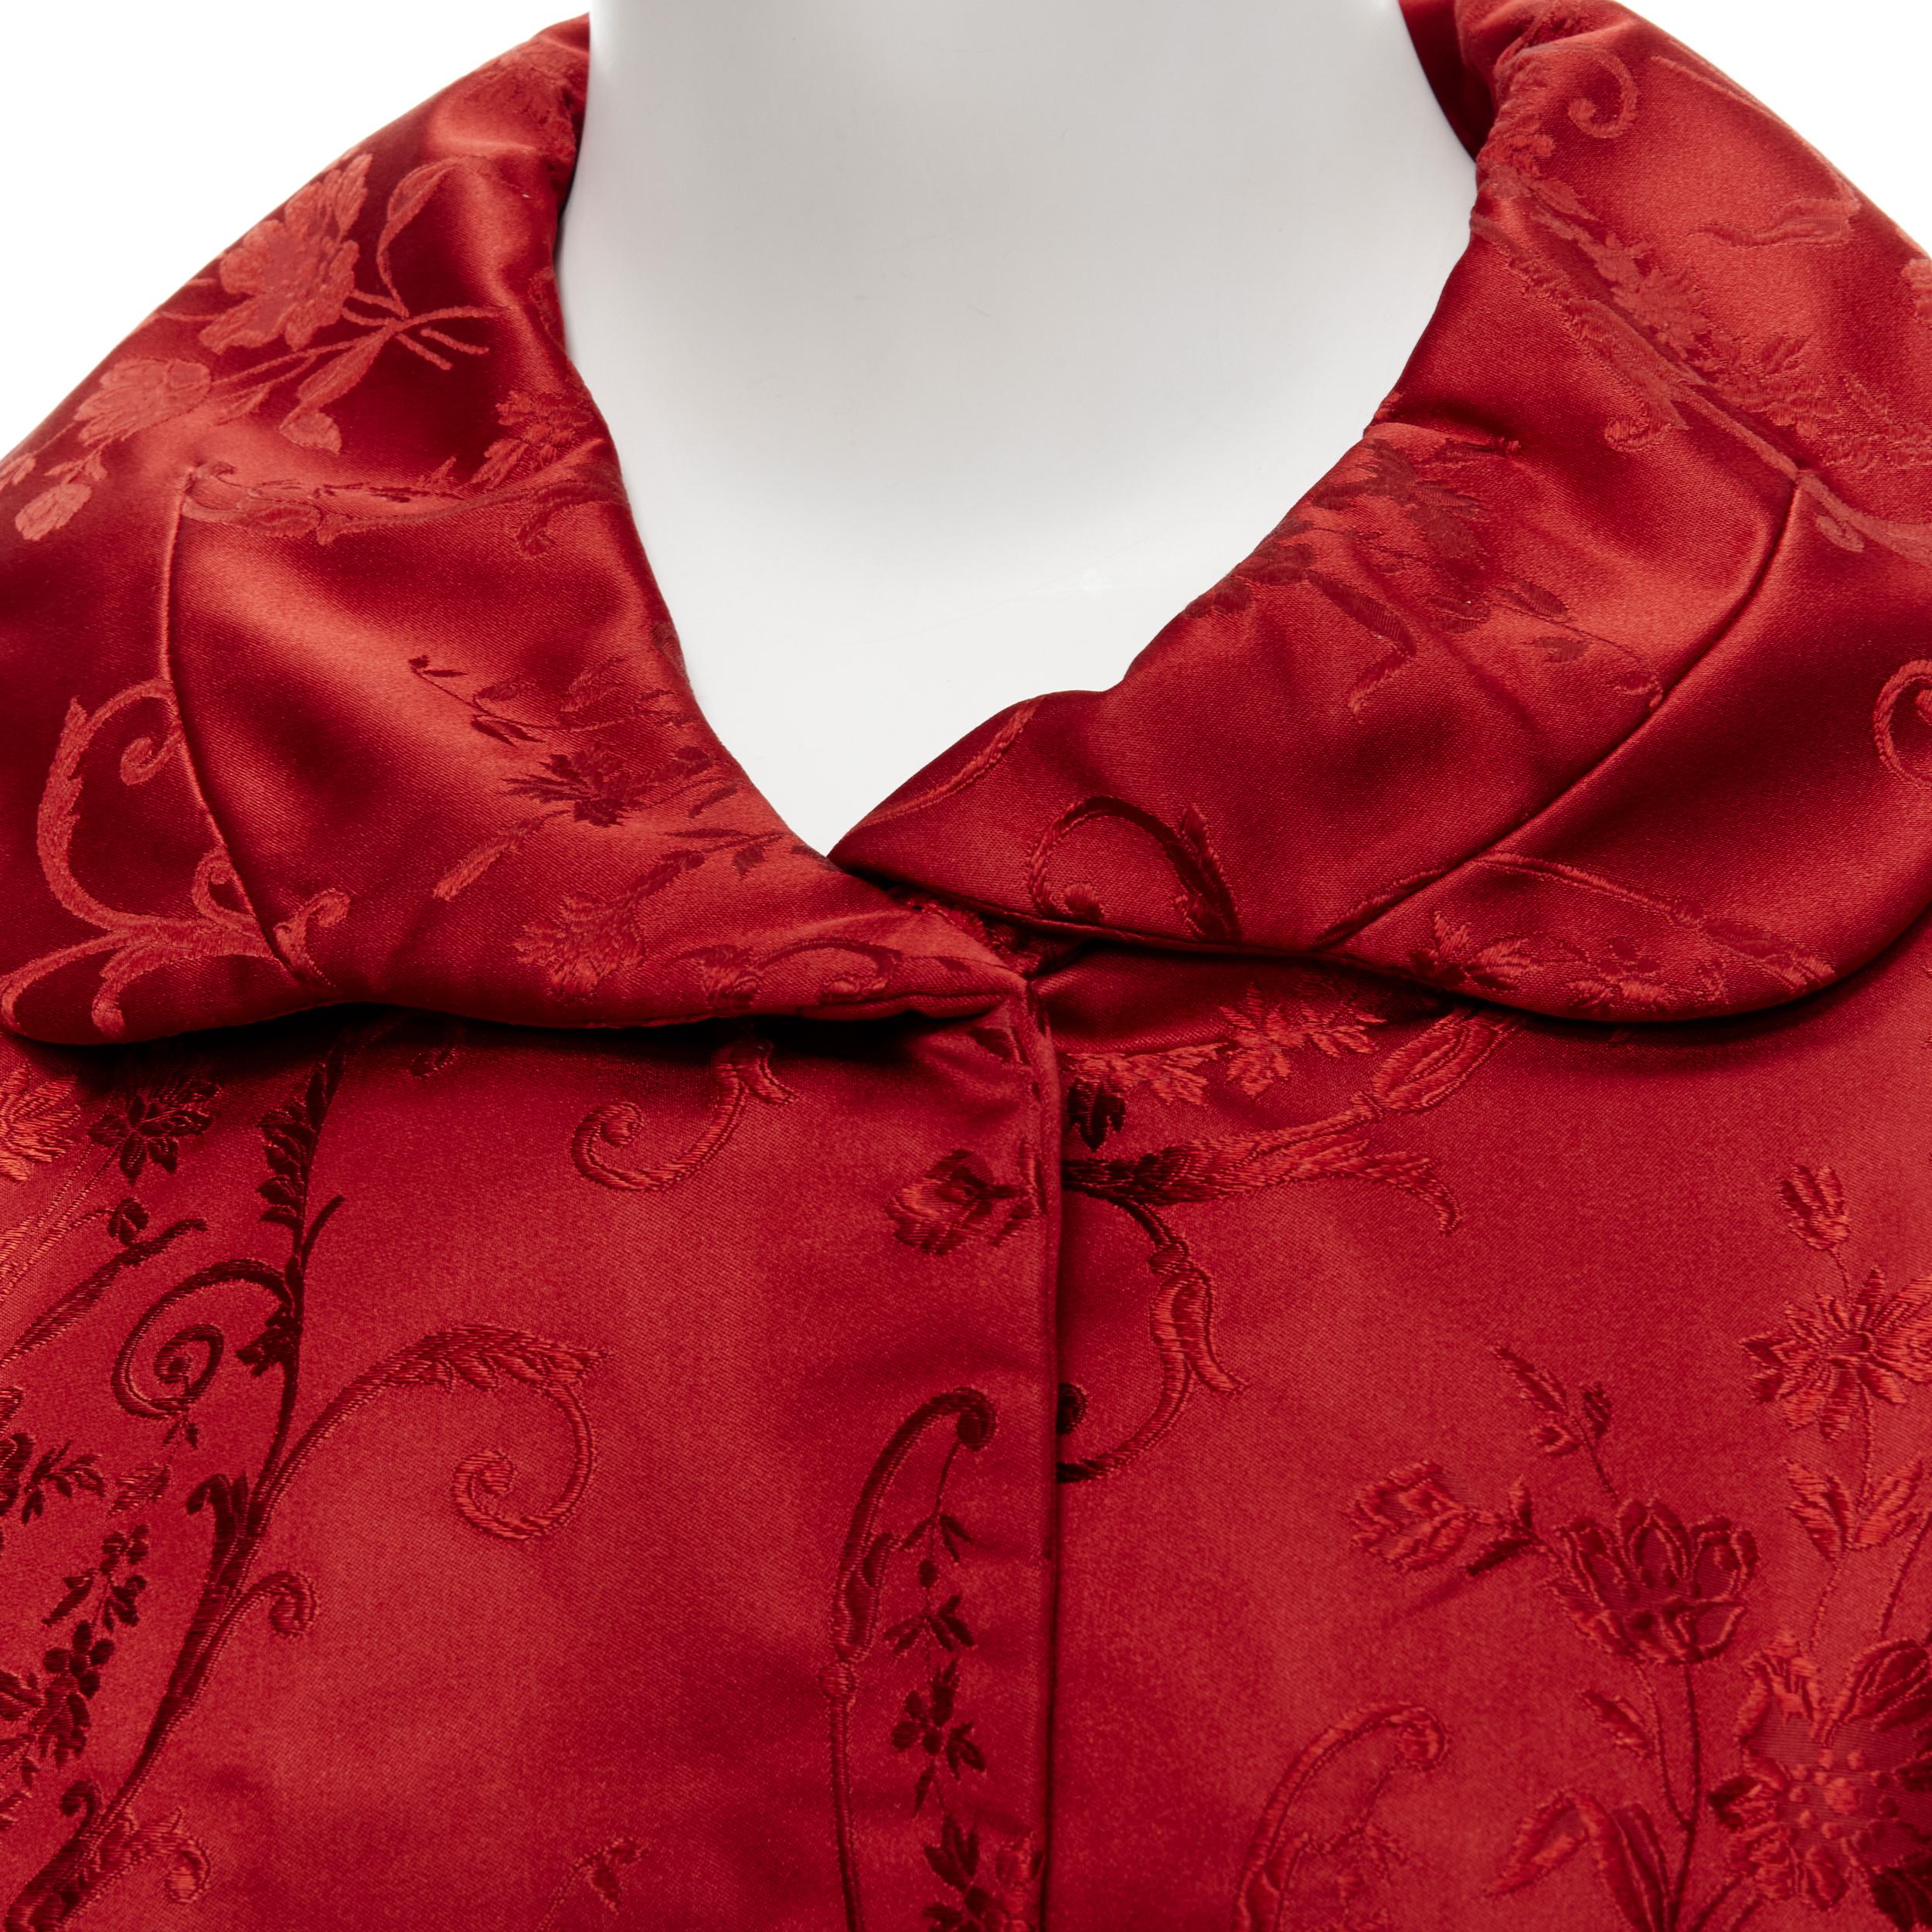 SHIATZY CHEN red chinoiserie oriental floral jacquard silk cropped jacket IT40 S 
Reference: CELG/A00064 
Brand: Shiatzy Chen 
Material: Silk 
Color: Red 
Pattern: Solid 
Closure: Snap 
Extra Detail: Curved slit pockets. Rounded shoulder. 
Made in: